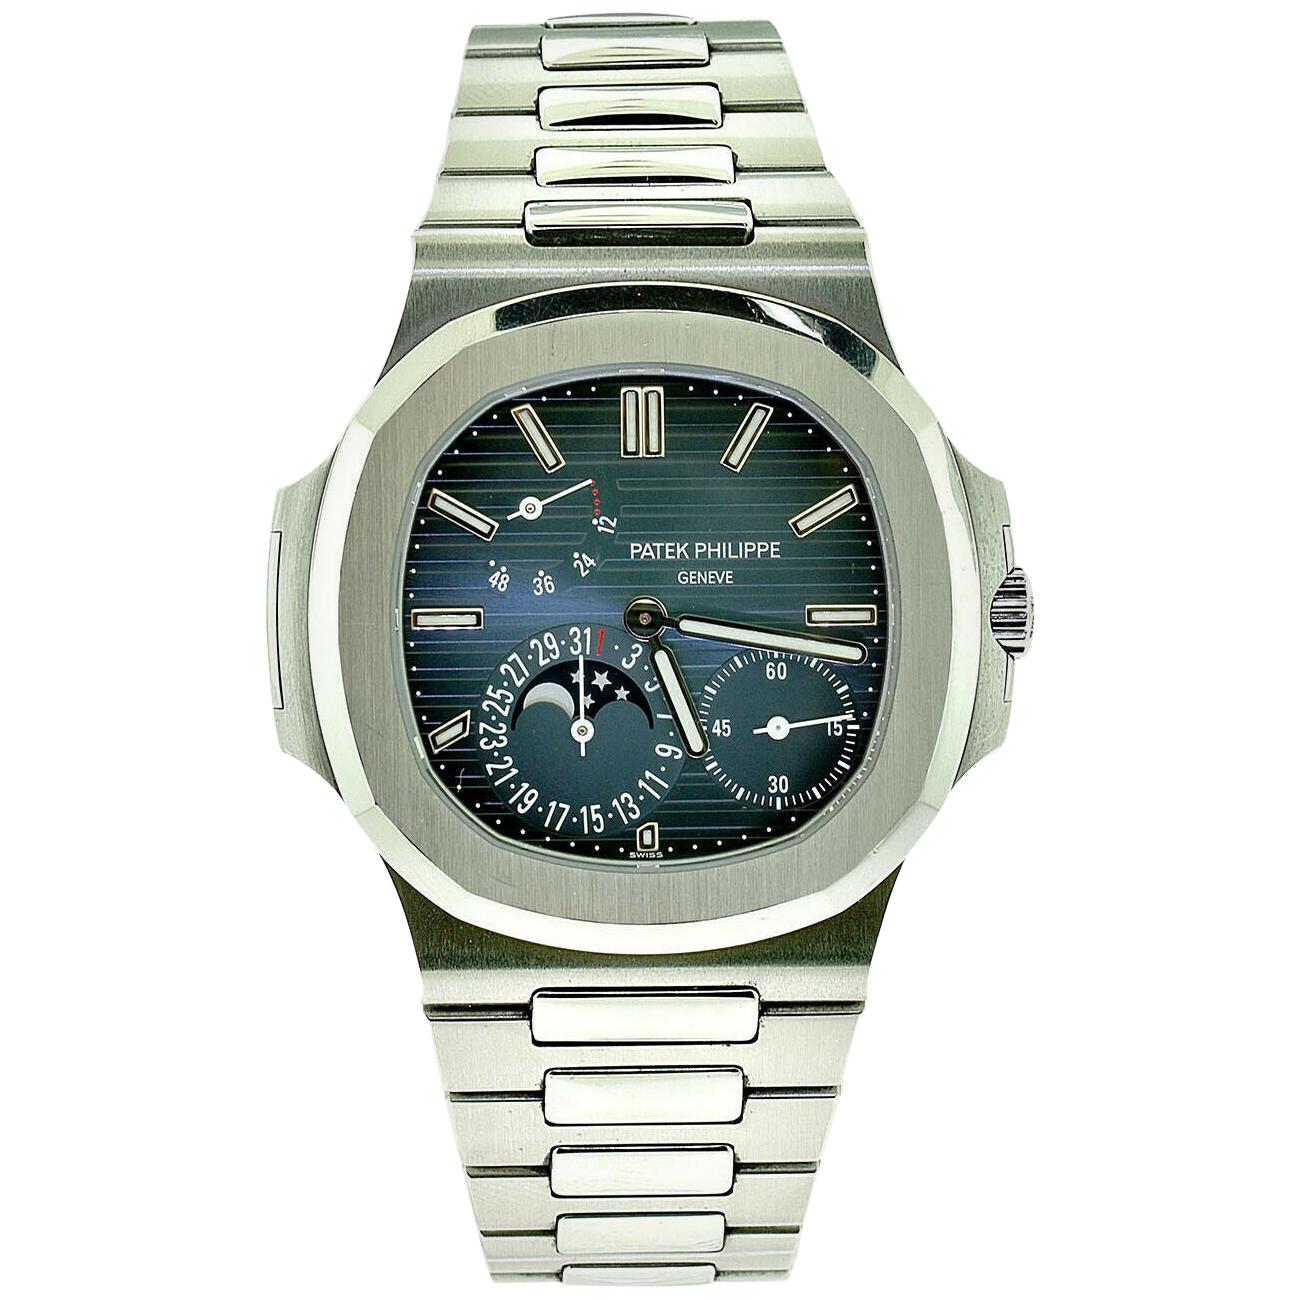 Patek Philippe Nautilus 5712/1A 001 Men’s Watch For Sale at 1stDibs